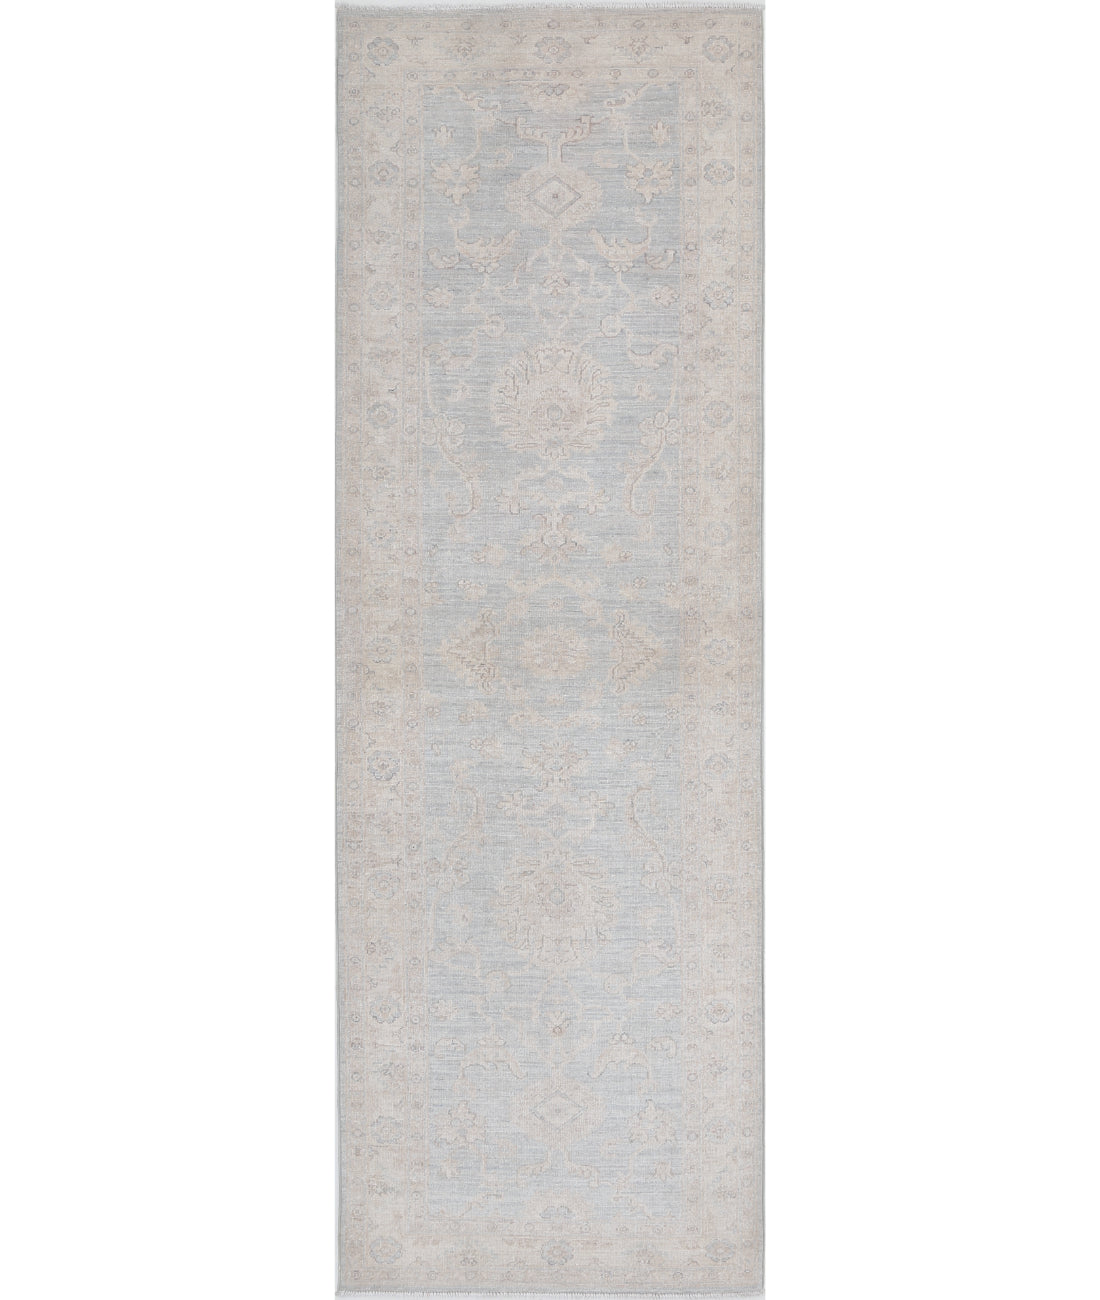 Hand Knotted Serenity Wool Rug - 2&#39;8&#39;&#39; x 6&#39;3&#39;&#39; 2&#39;8&#39;&#39; x 6&#39;3&#39;&#39; (80 X 188) / Grey / Ivory